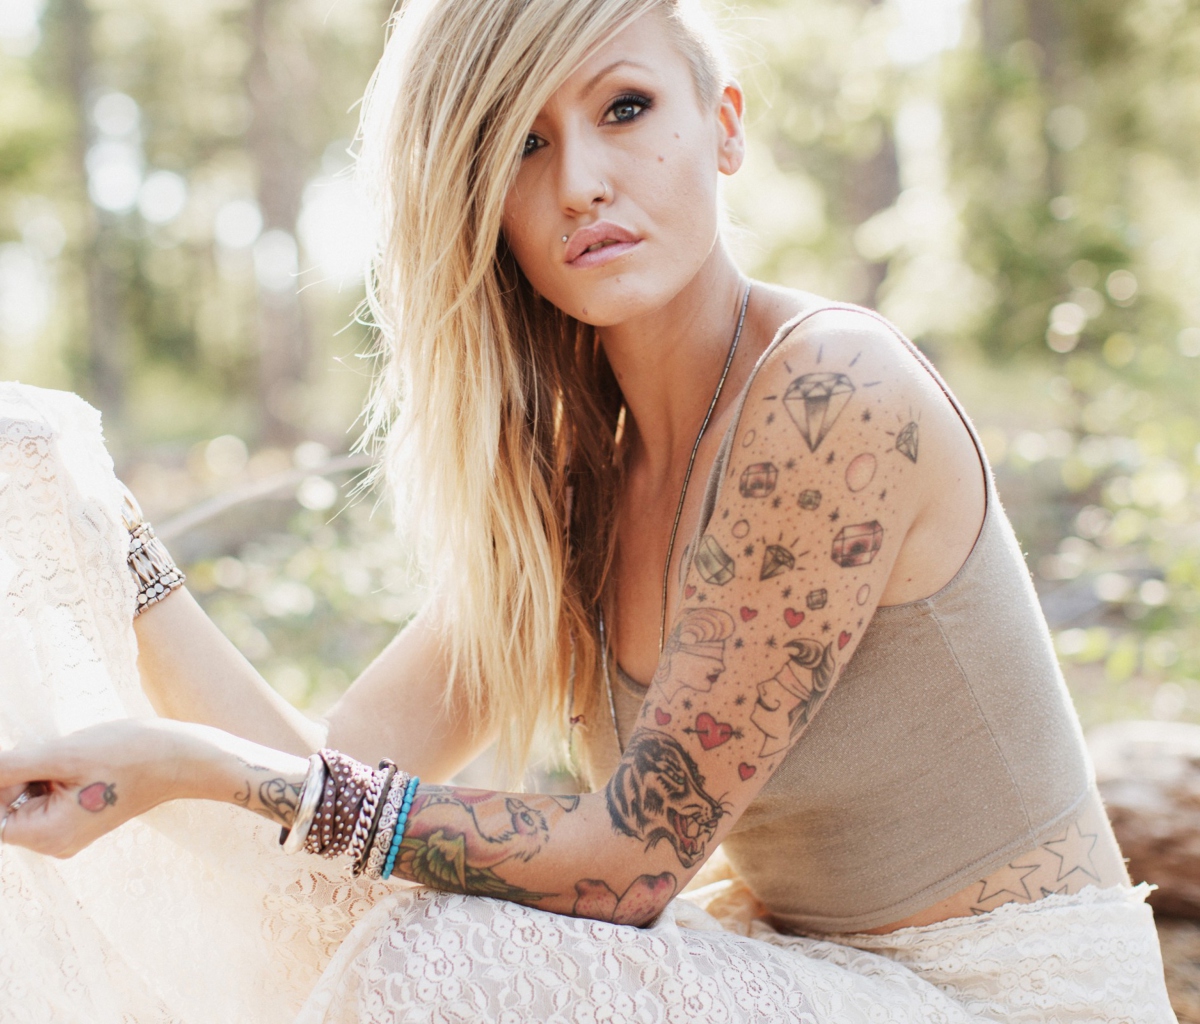 Blonde Model With Tattoes wallpaper 1200x1024